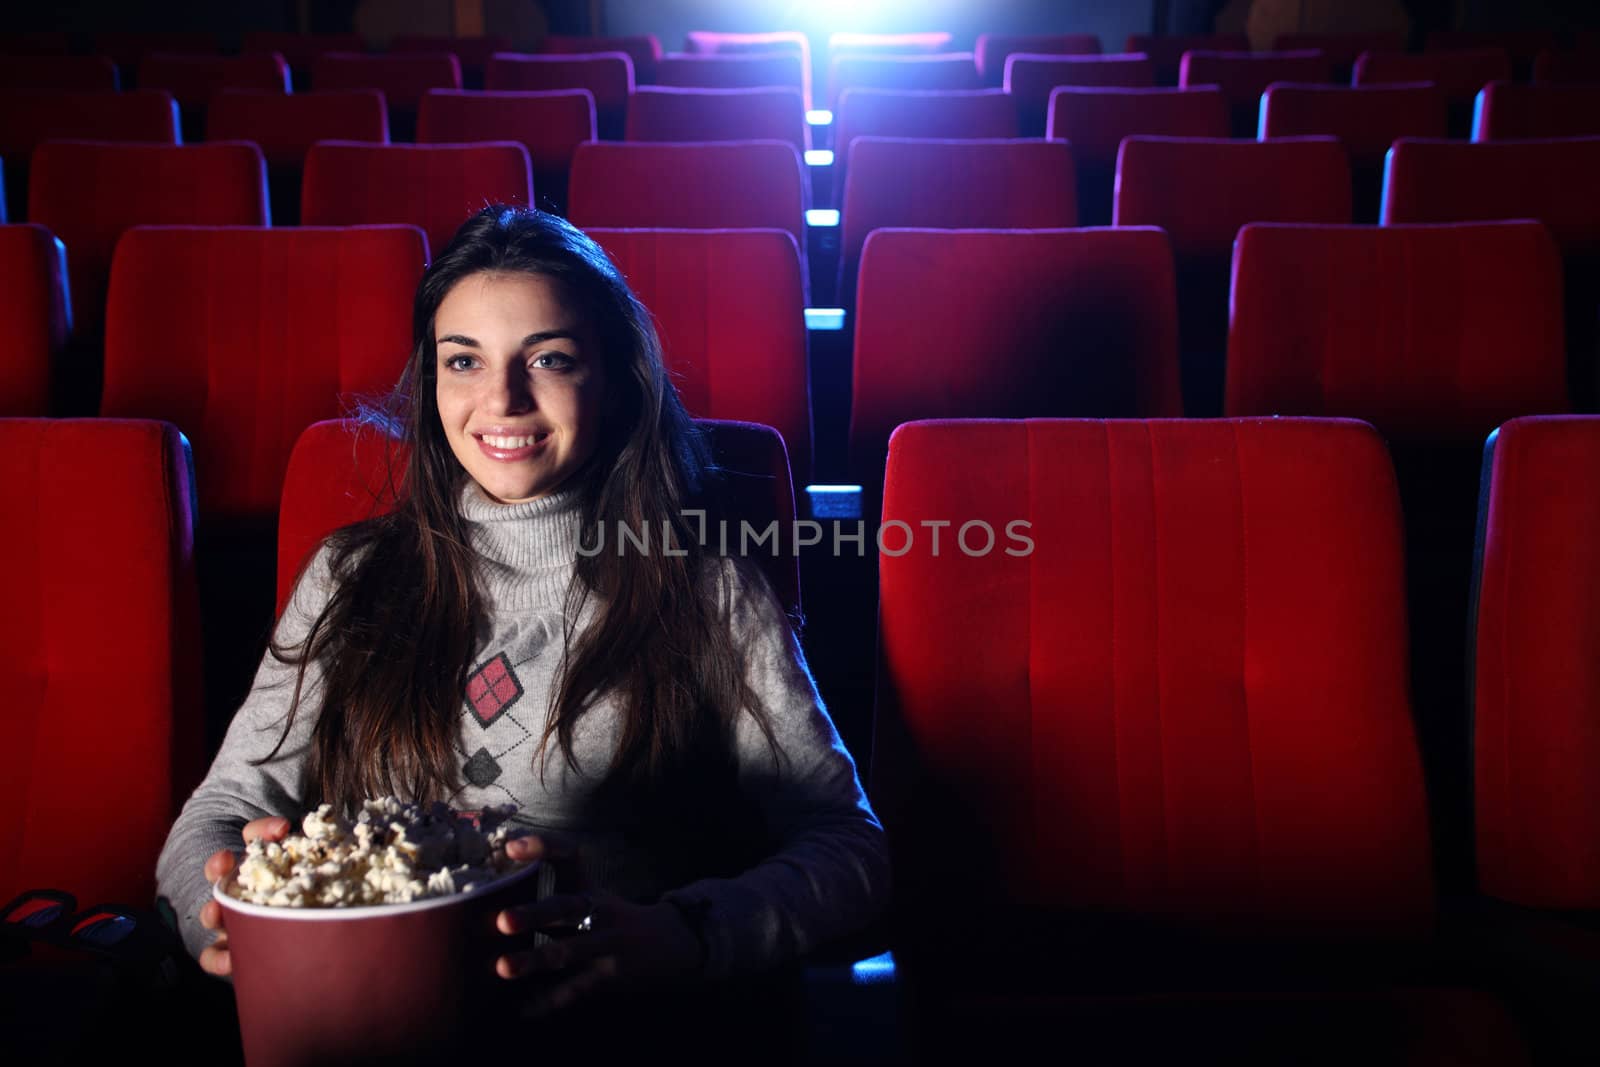 a pretty girl alone sitting in a empty movie theater, she eats p by stokkete